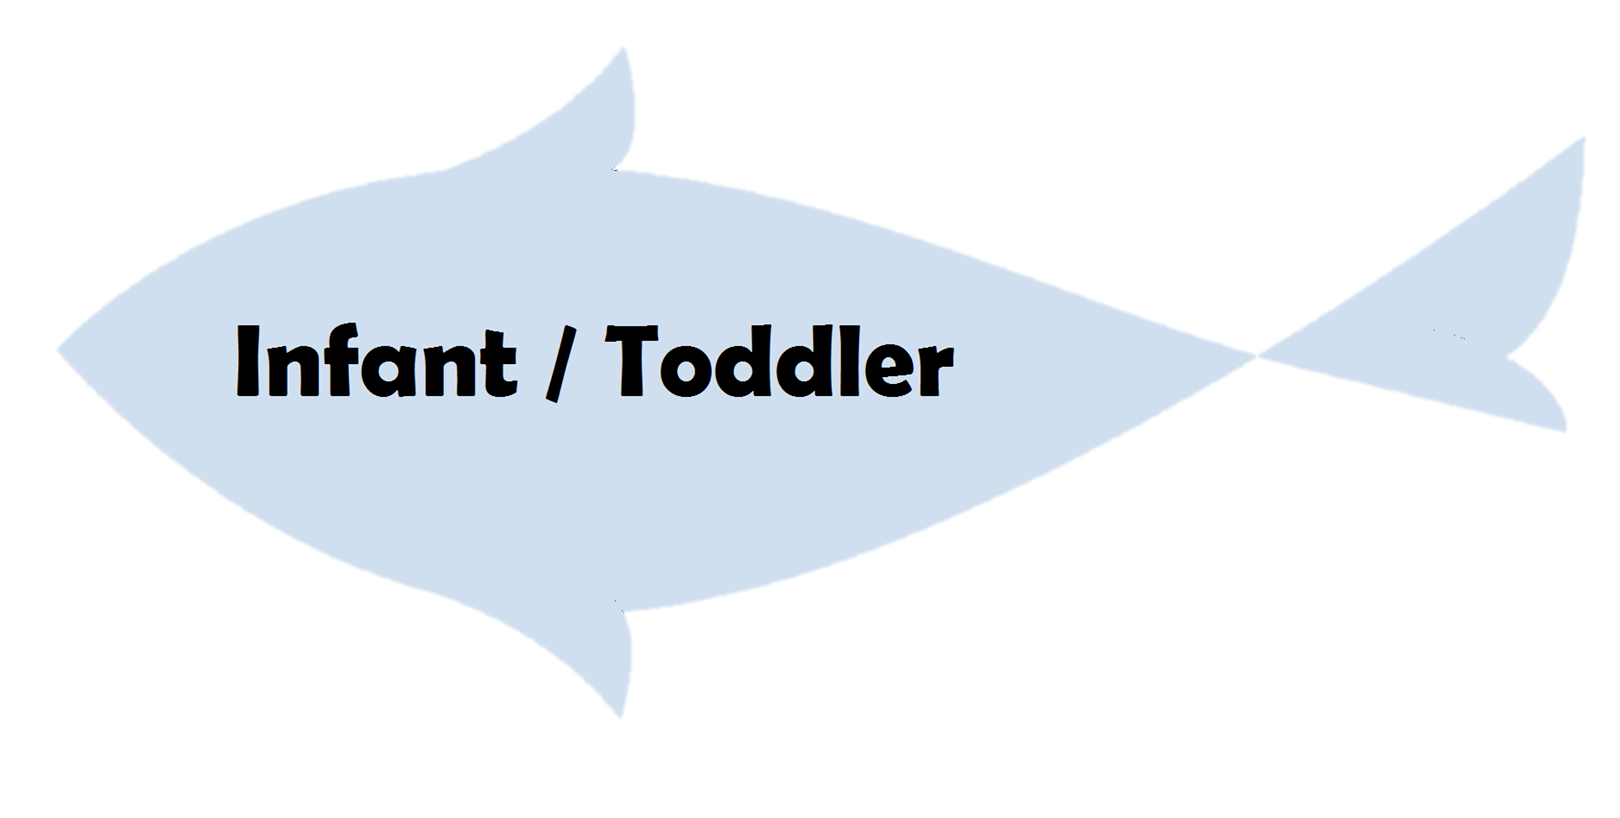 Infant and Toddler in Bubble